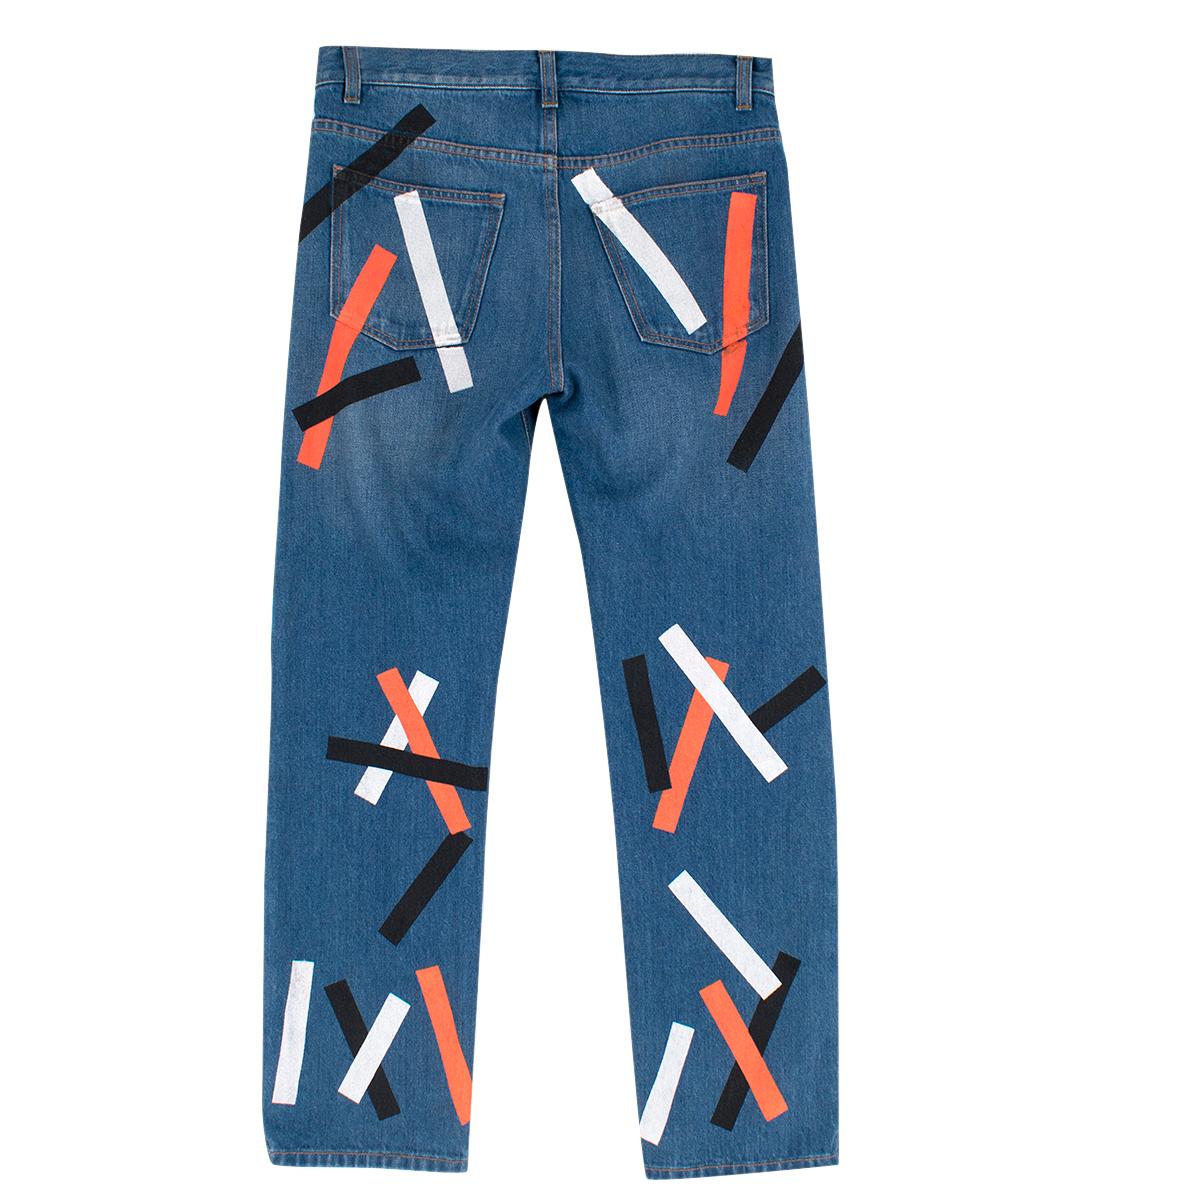 Christopher Kane Denim Jeans with Multicolor Paint Detail

-Blue denim, 100% cotton
-Orange/black/white paint stripes 
-High-waisted fit
-Two functional front and back pockets
-Silver zip and button closure
-Neon yellow strip of lining on interior